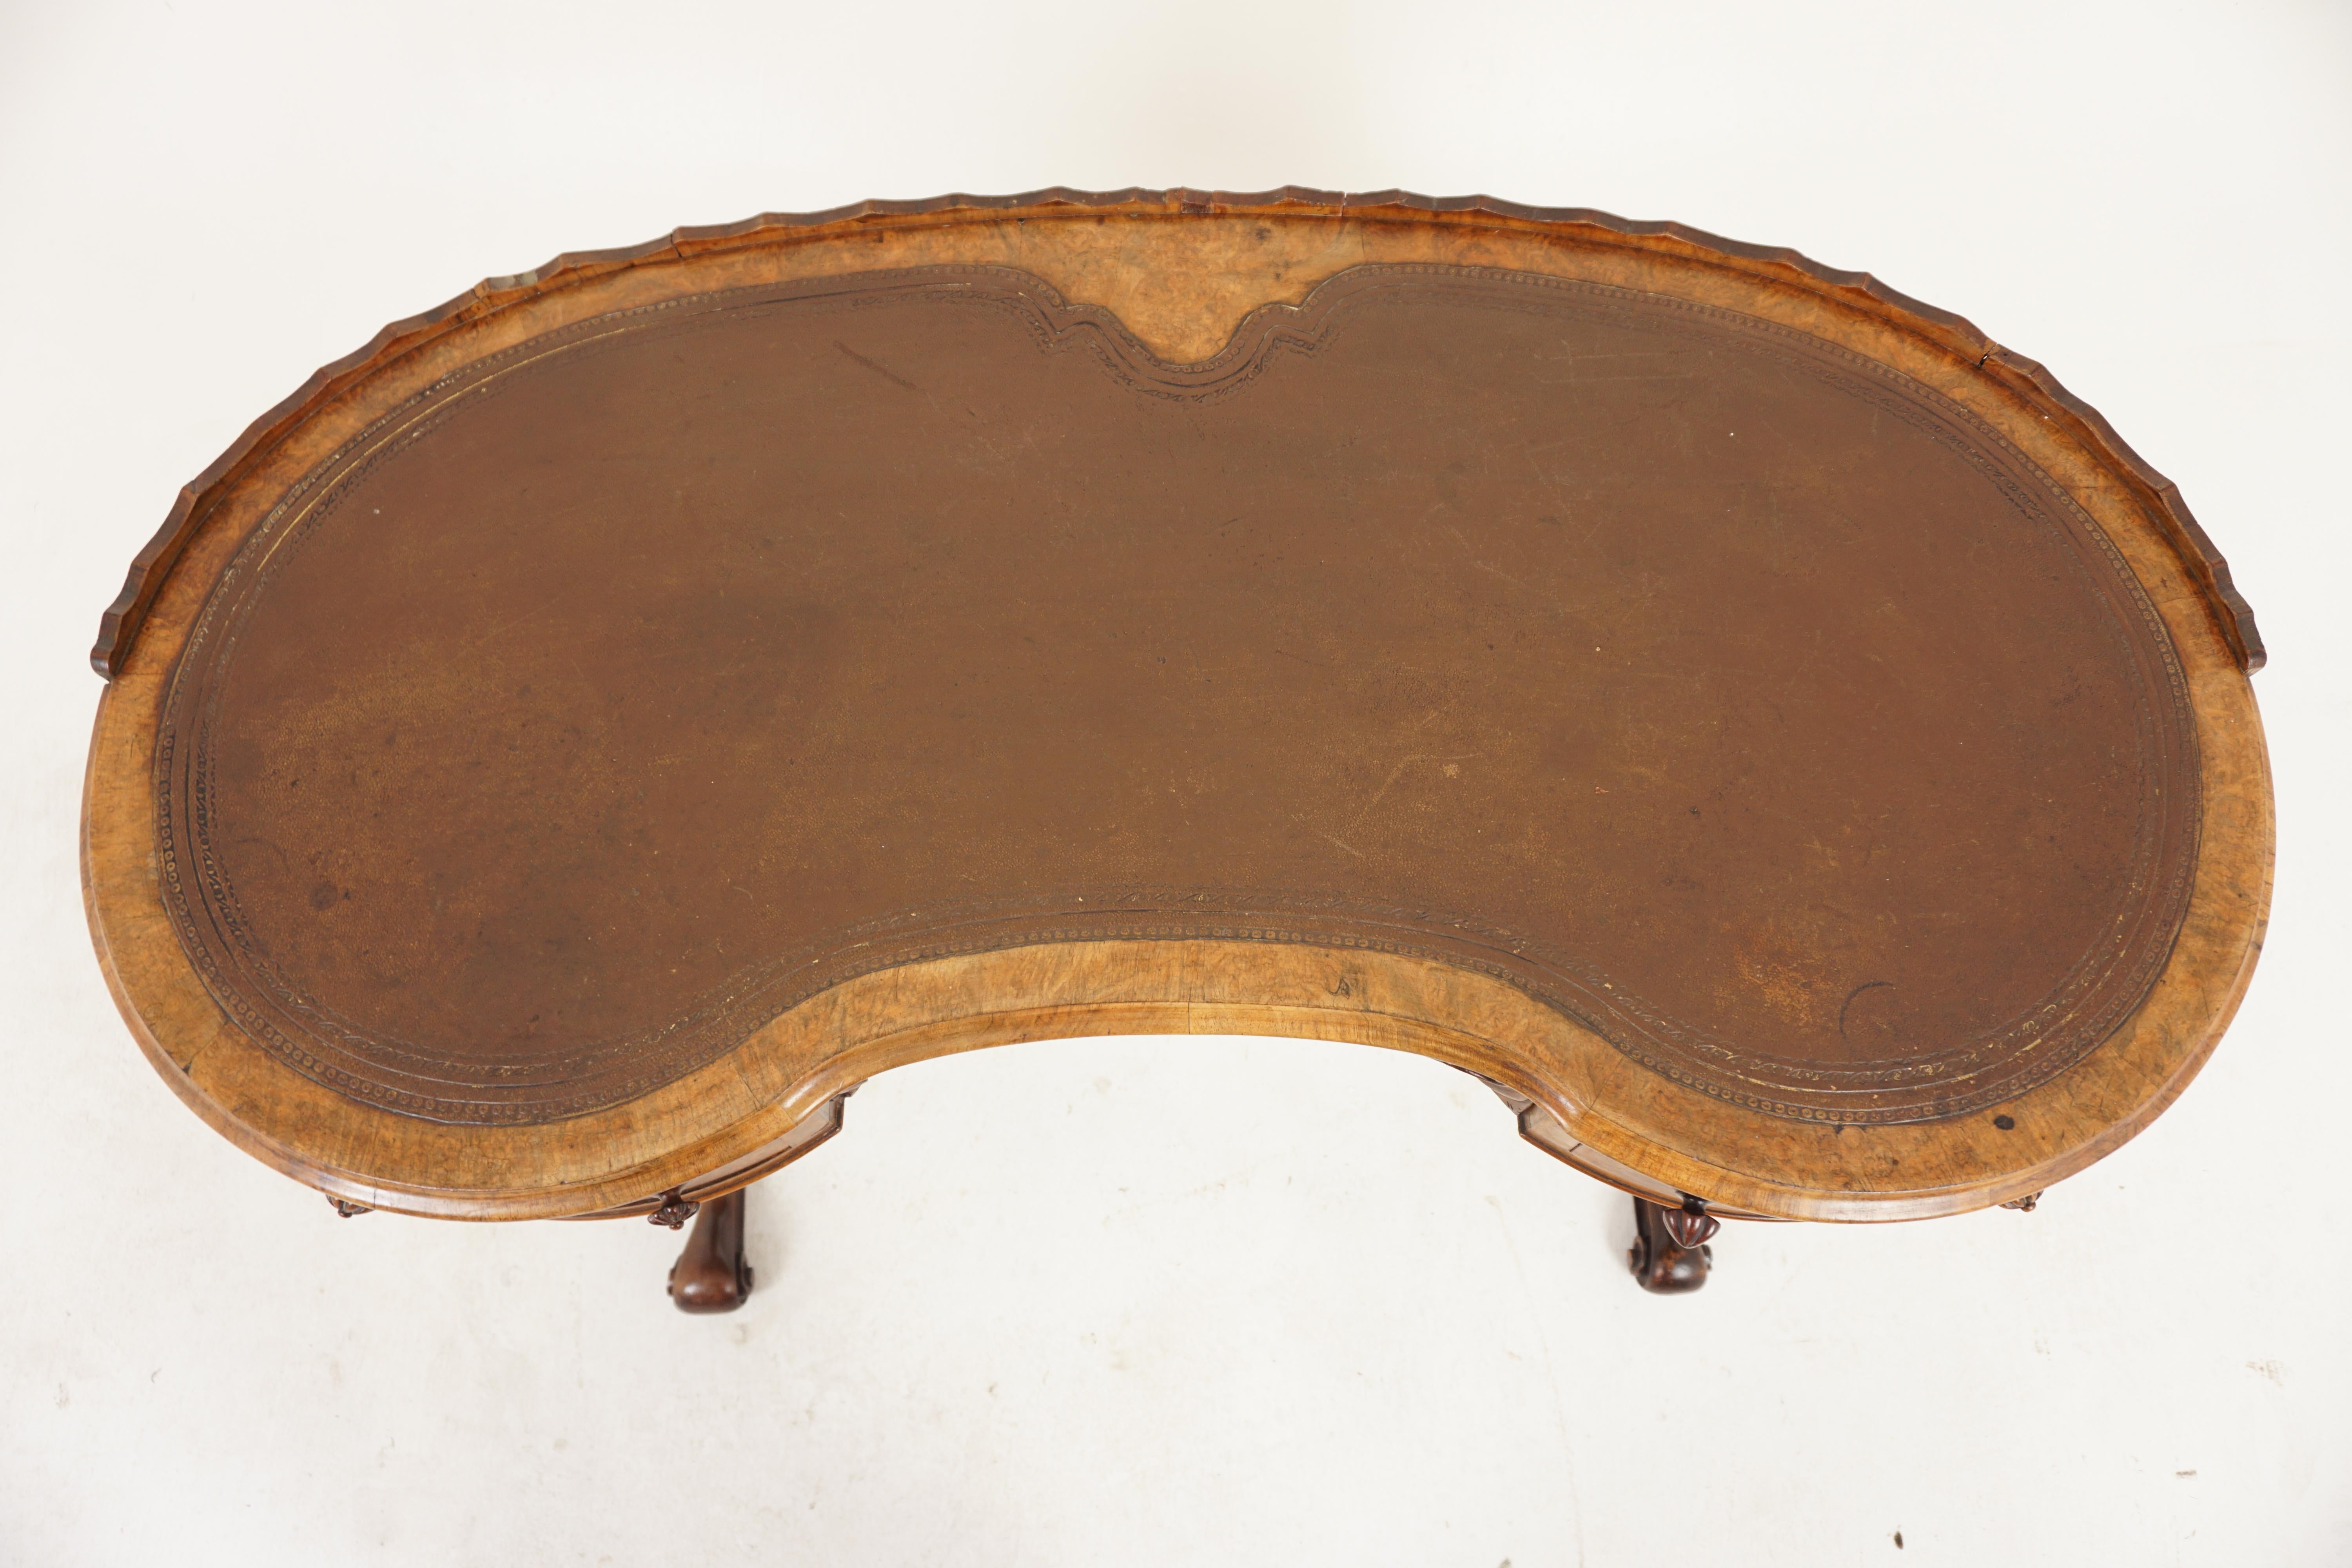 Late 19th Century Antique Burr Walnut Kidney Shaped Desk, Writing Table, Scotland 1870, H1178 For Sale